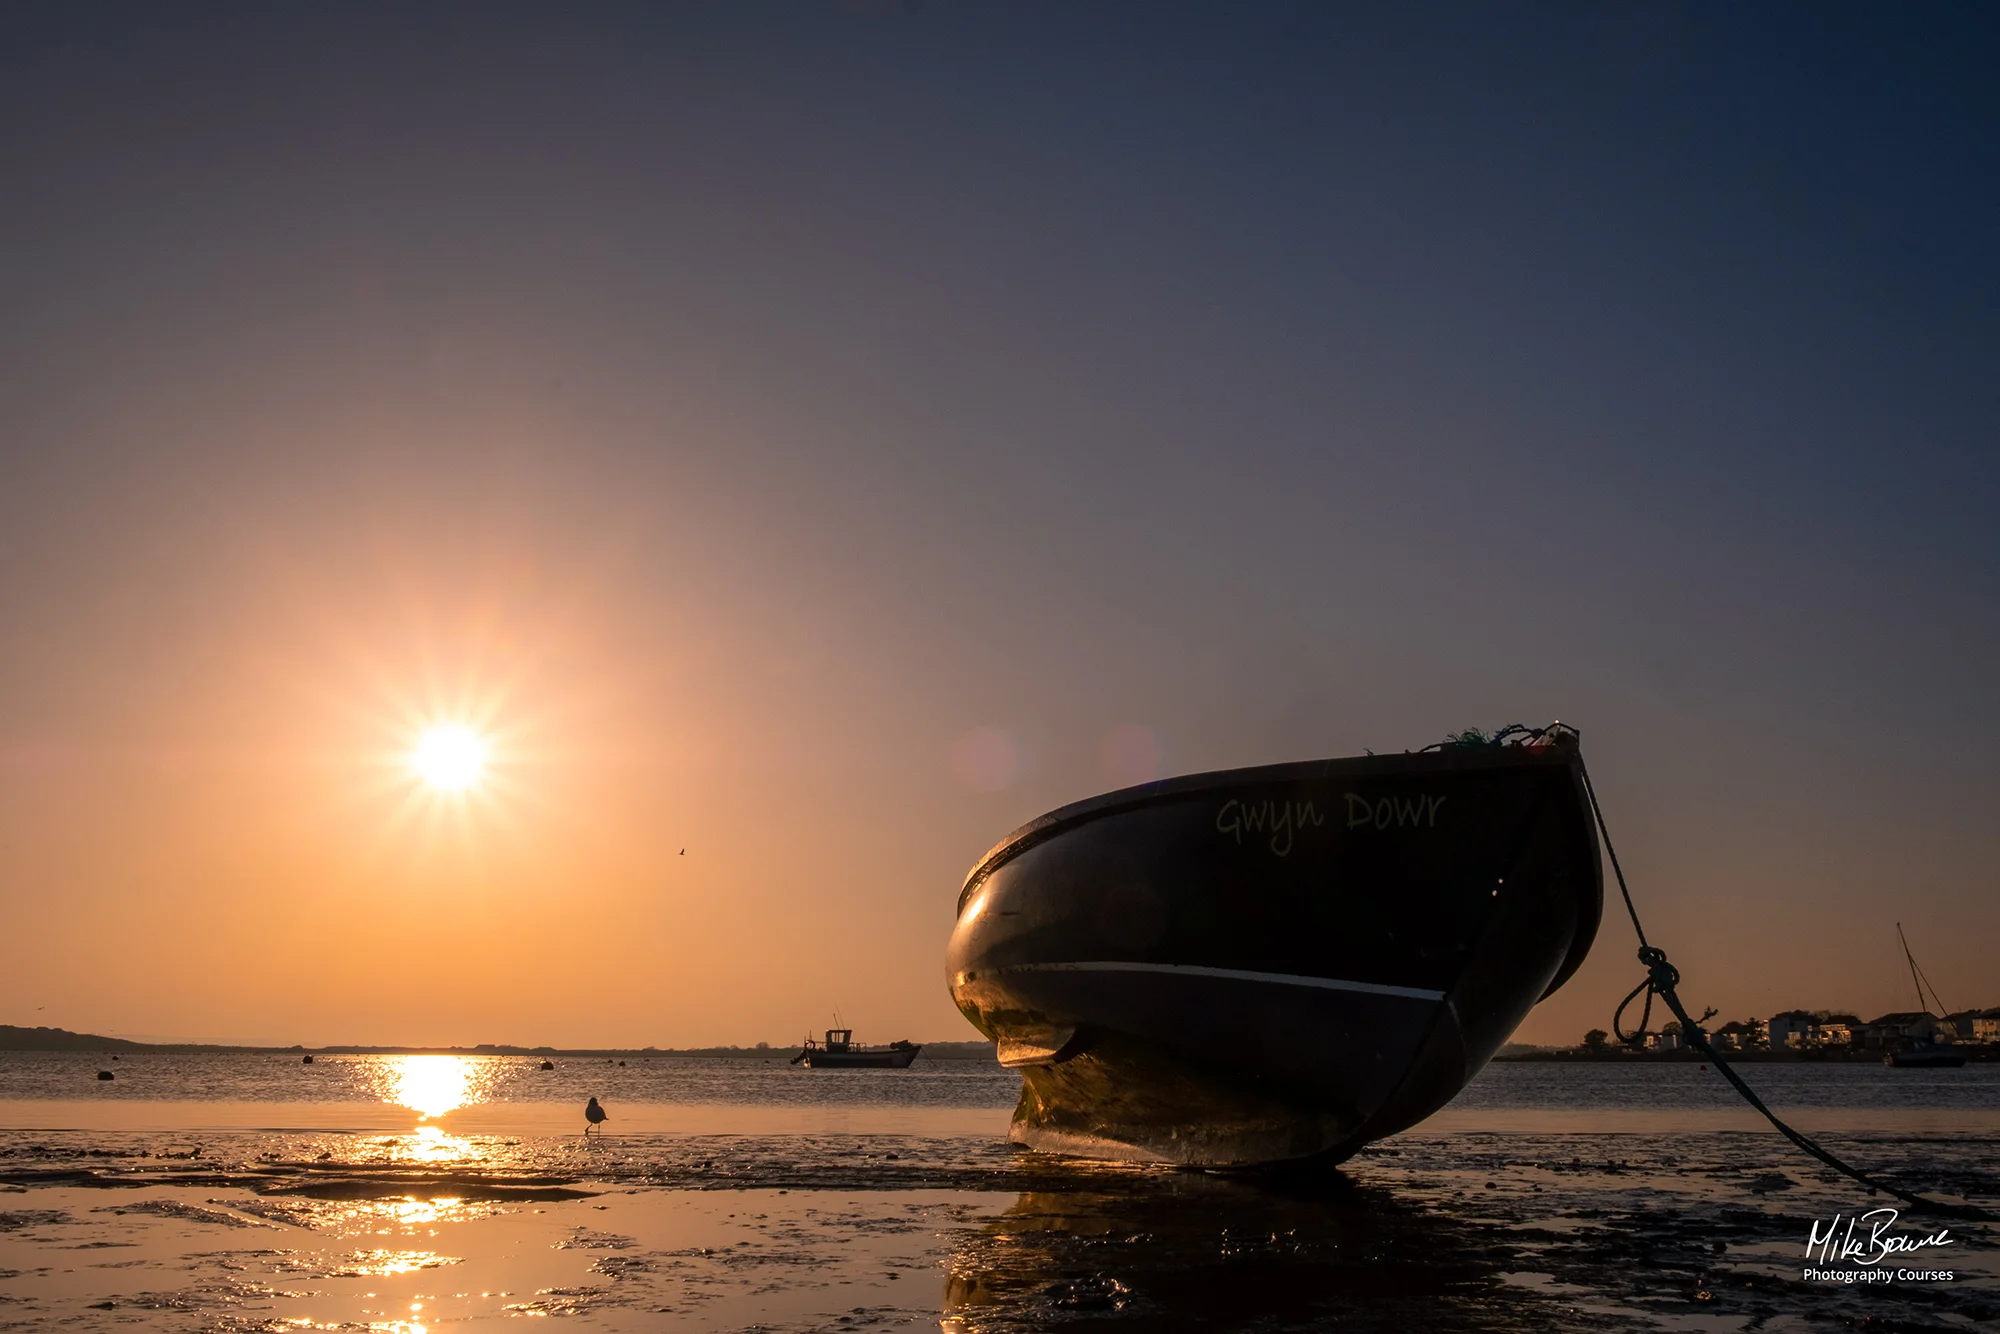 Small boat on mudflats at low tide during sunset